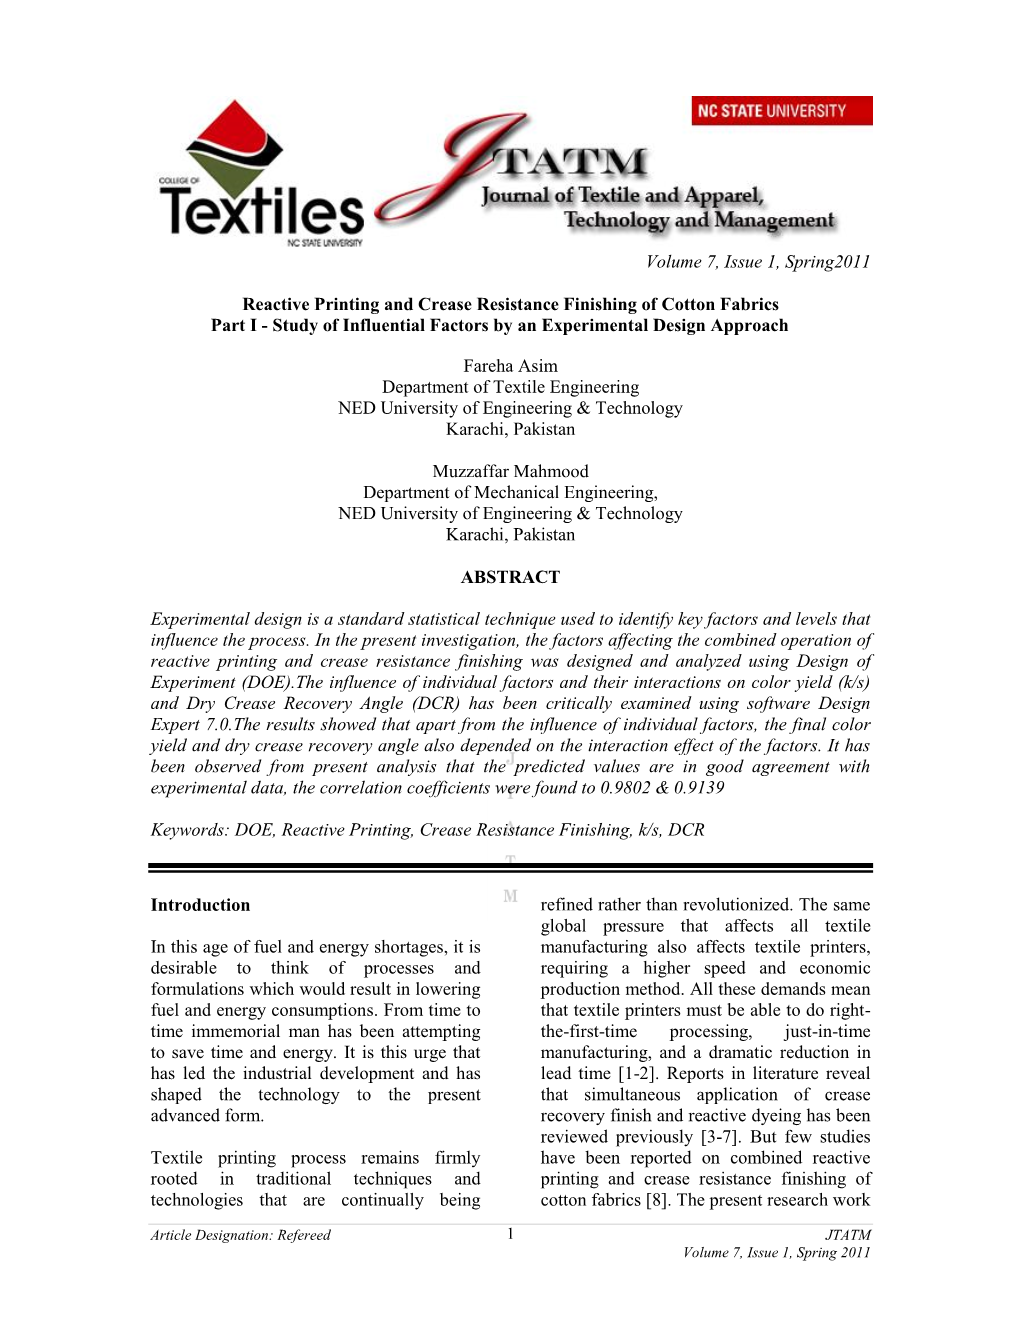 Reactive Printing and Crease Resistance Finishing of Cotton Fabrics Part I - Study of Influential Factors by an Experimental Design Approach